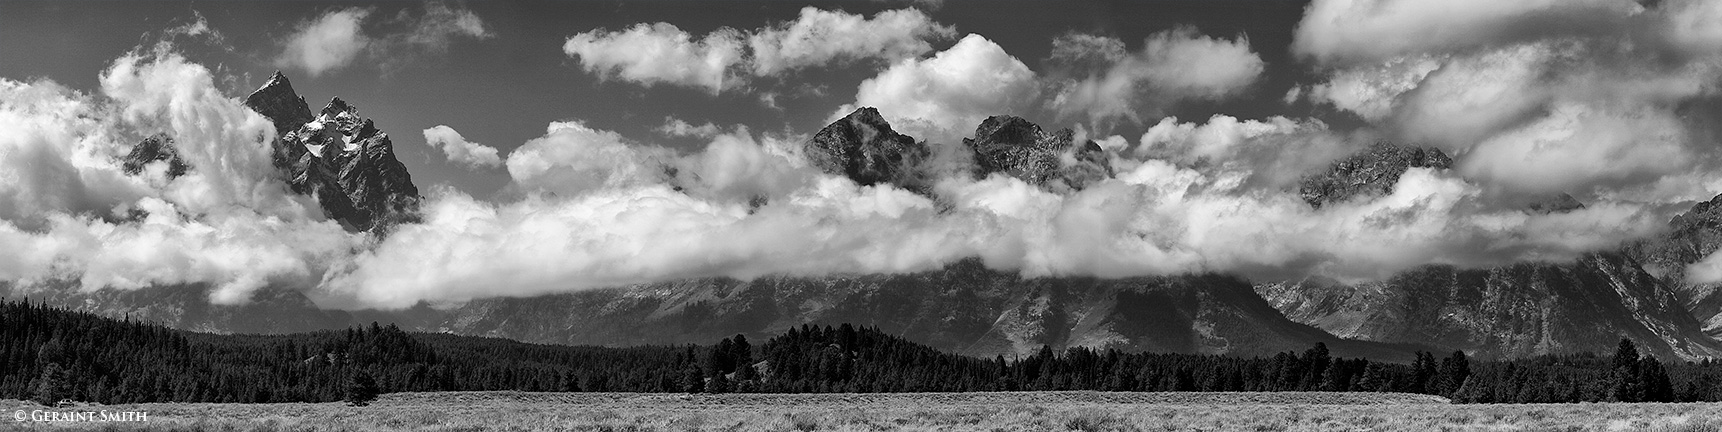 Flashback ... Tetons 2005 ... riding bicycles with my kids and this scene as the backdrop